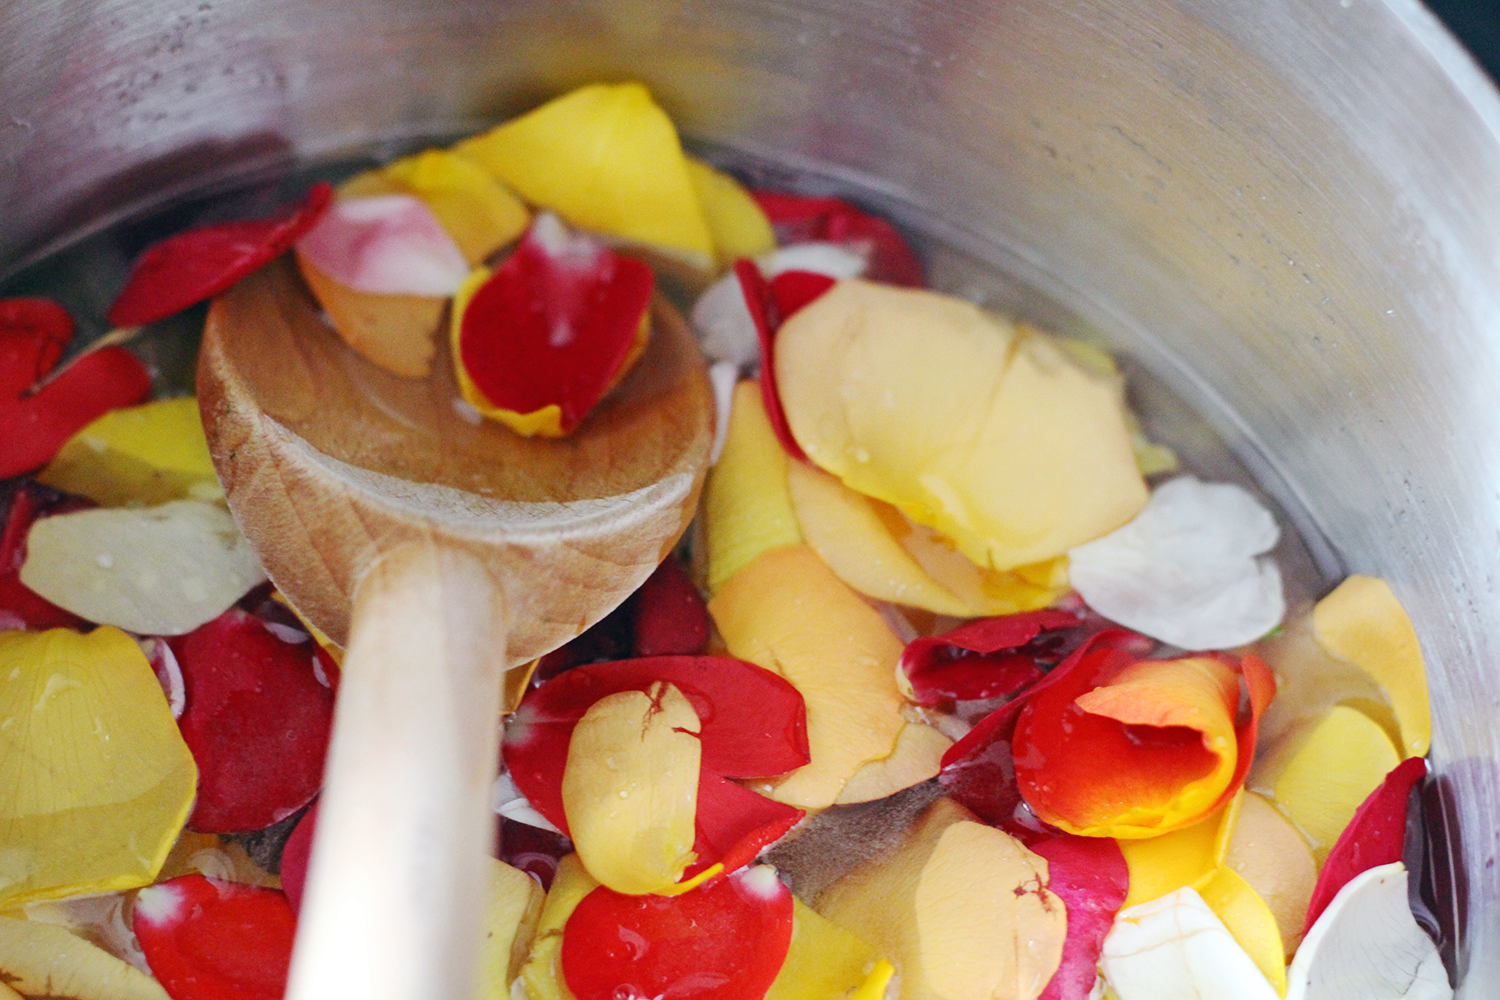 One way to use edible rose petals is by making a homemade rose simple syrup